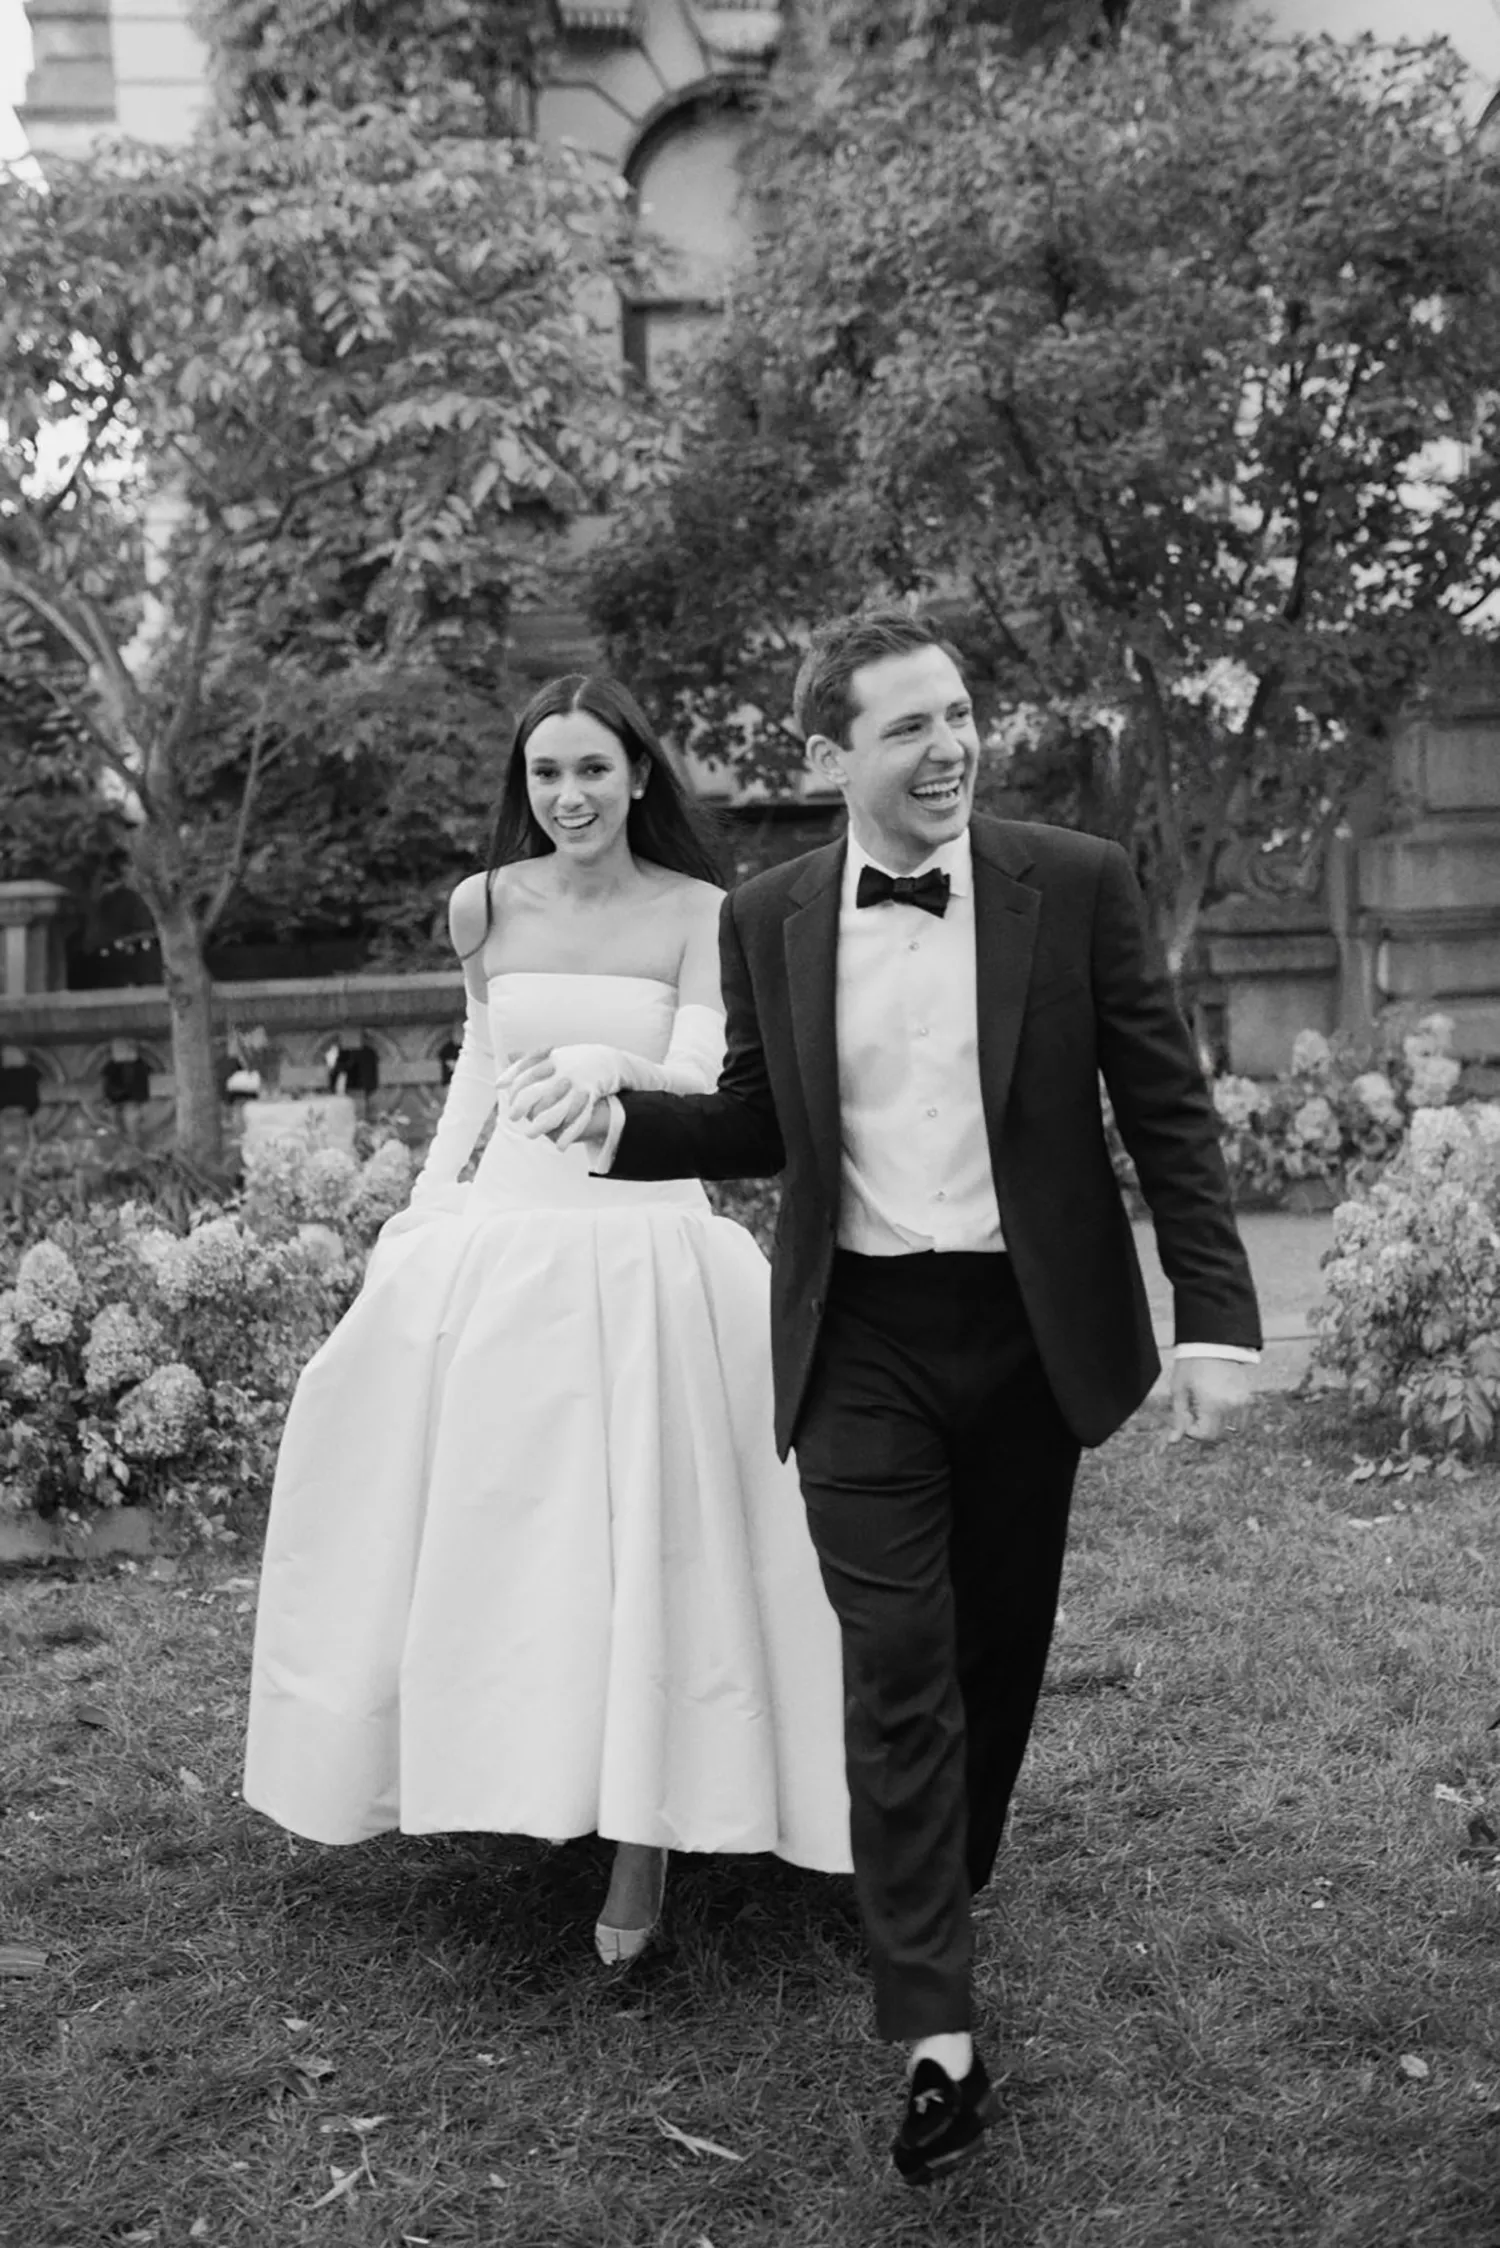 A candid moment of joy by Samm Blake, recognized in the Top Wedding Photographers of 2024, depicts a chic bride in an elegant mid-length dress and a groom in a classic tuxedo, both laughing and walking hand in hand through a lush garden.